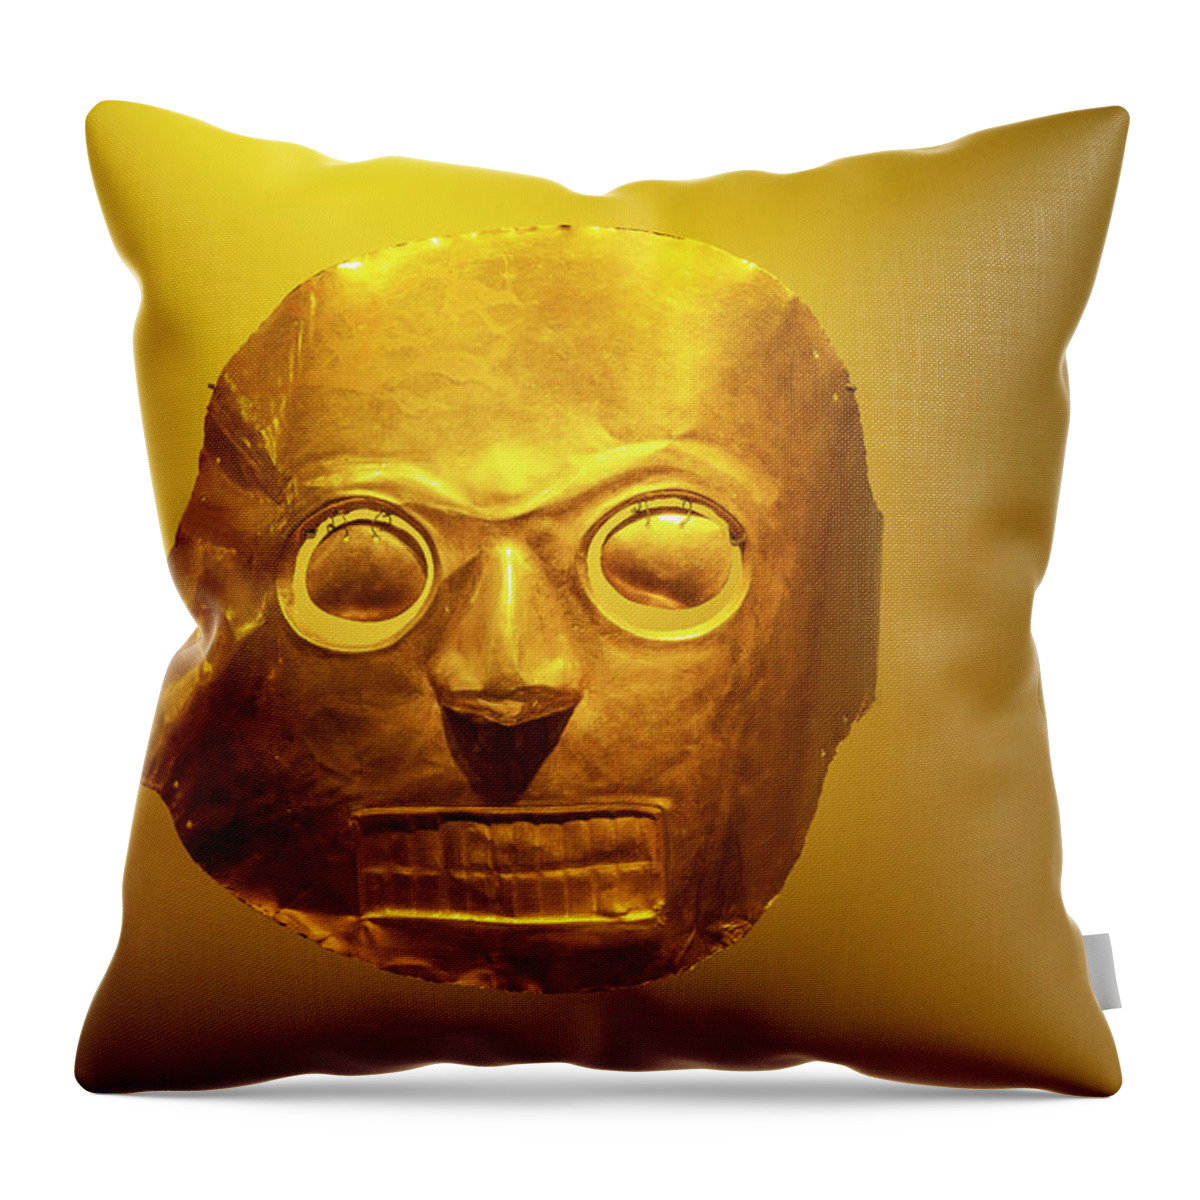 Estock Throw Pillow featuring the digital art Museum Of Gold, Bogota, Colombia by Claudia Uripos